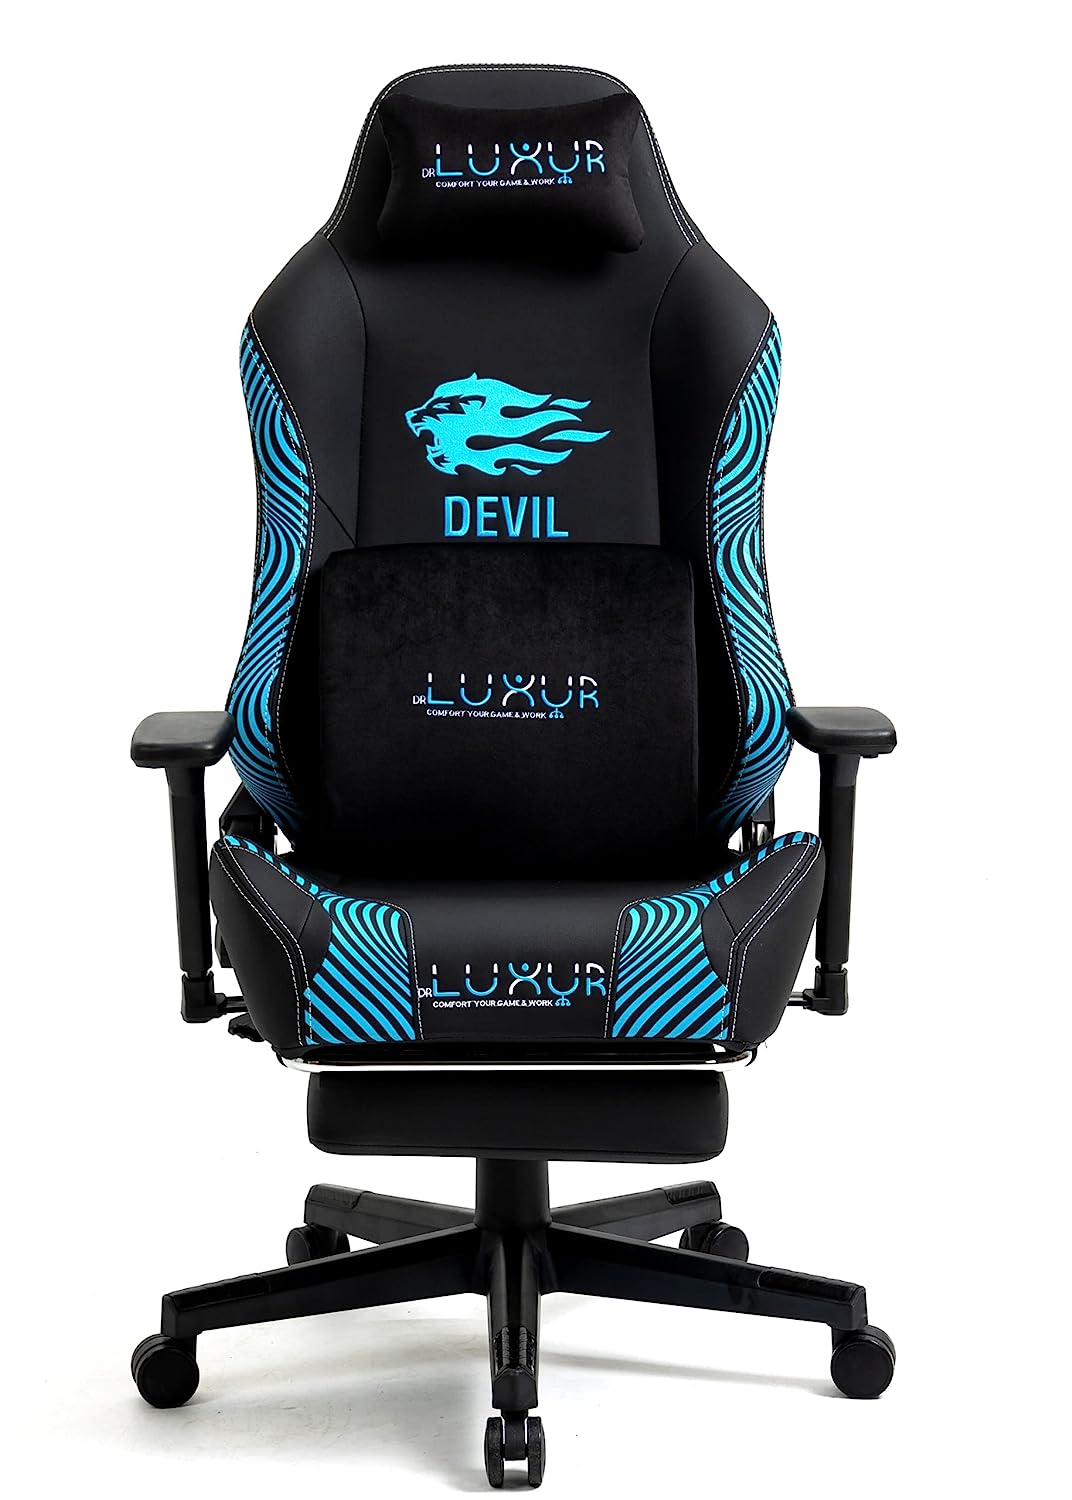 Dr Luxur OVERPOWER Series Gaming Chair for Gaming, Home Office and Study- Perfect For Work From Home with Lumbar Support, 2-D Armrest, Footrest and 180 Degree Recline, and Multi Locking Position (OverPower)